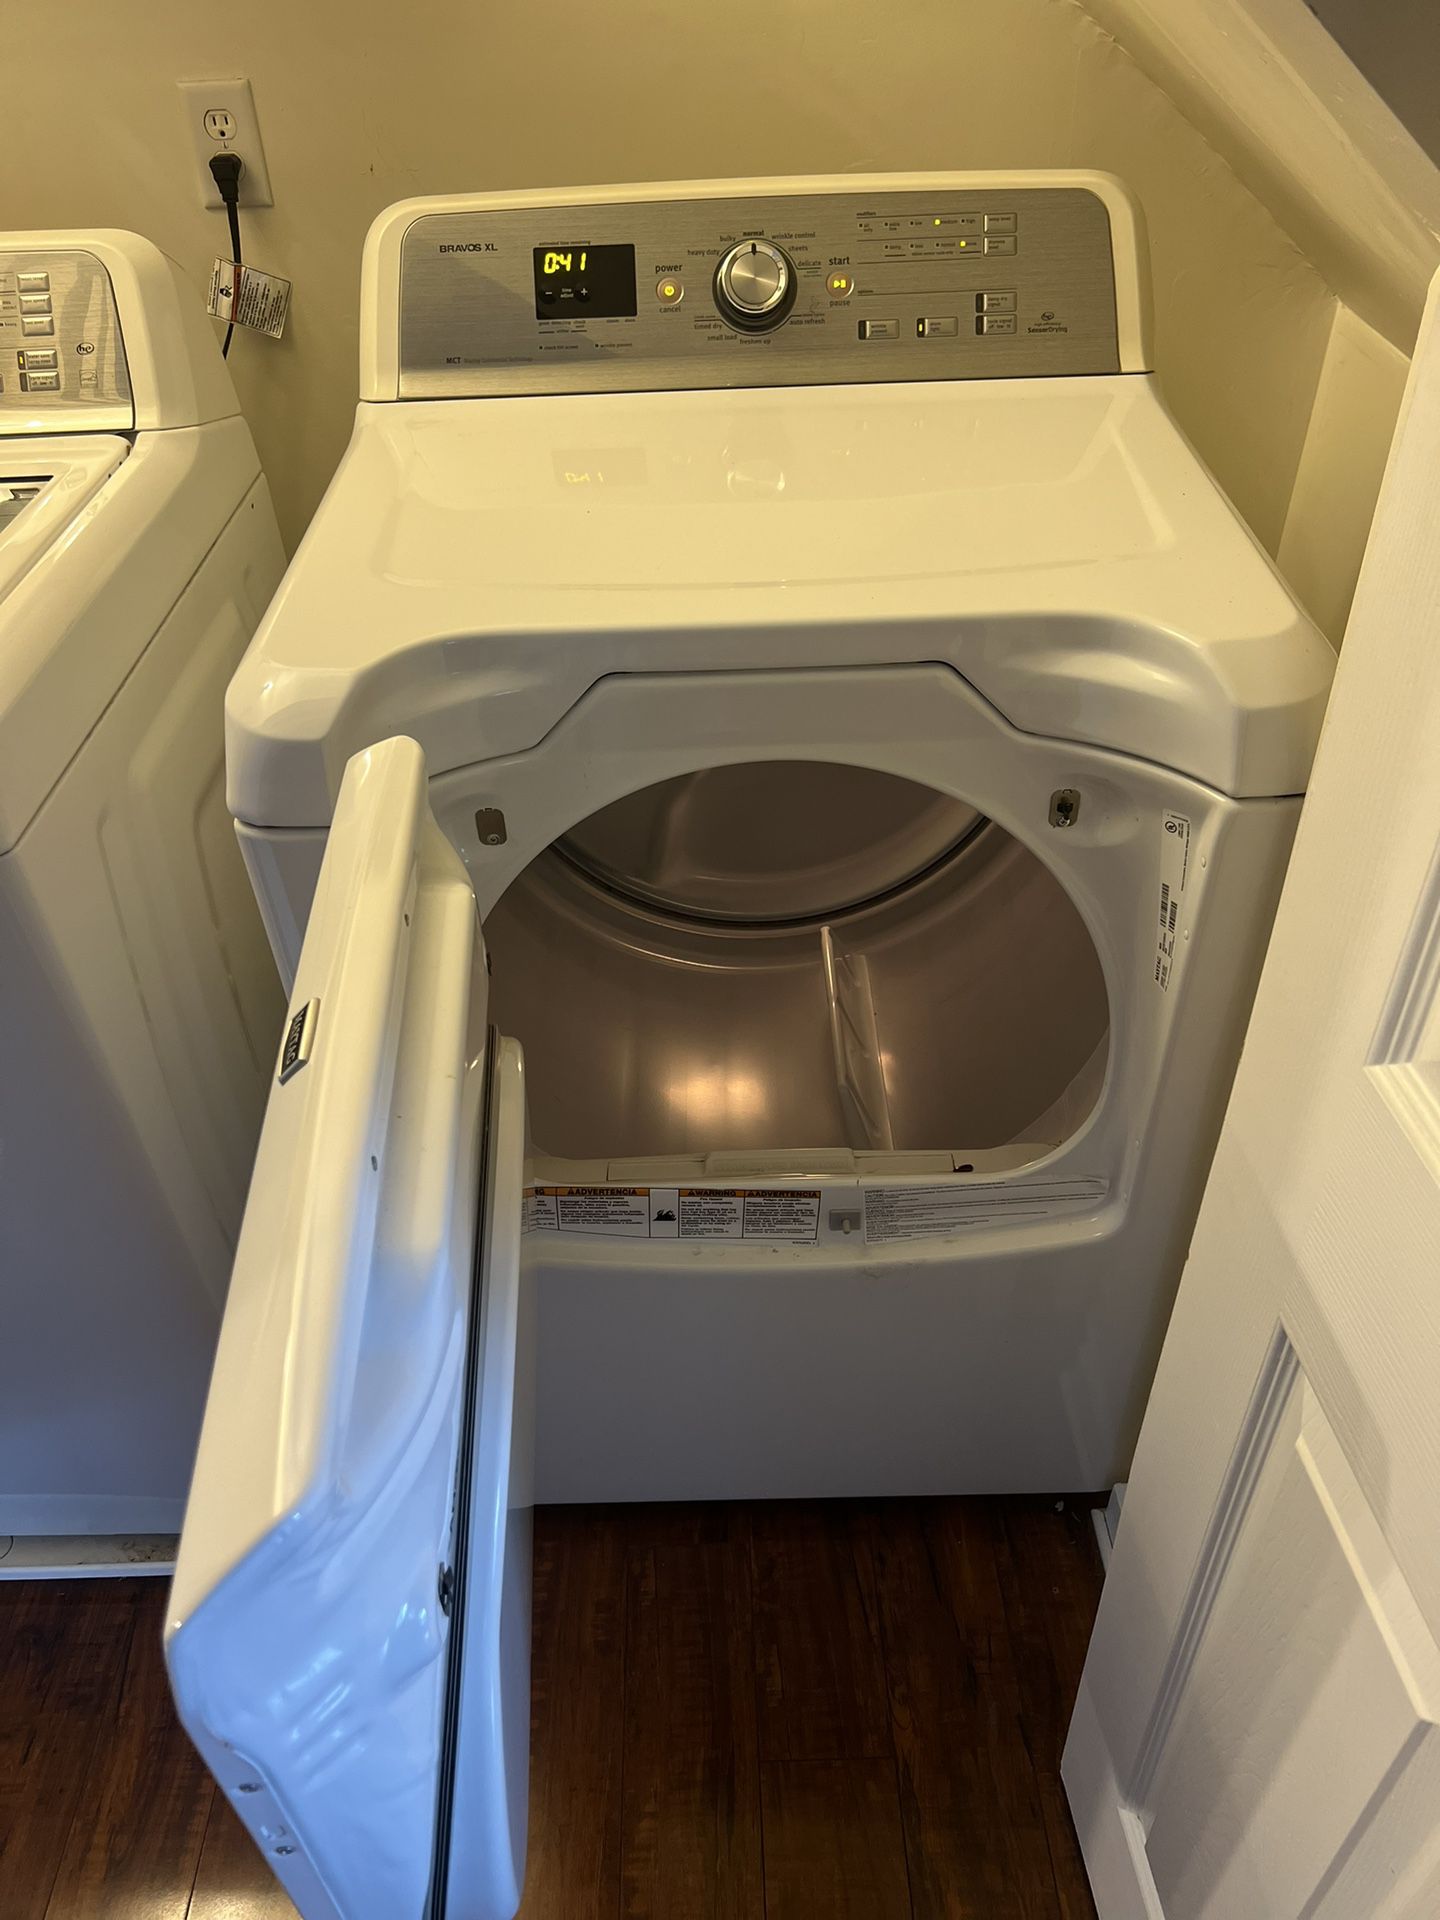  Washer And Dryer Set 